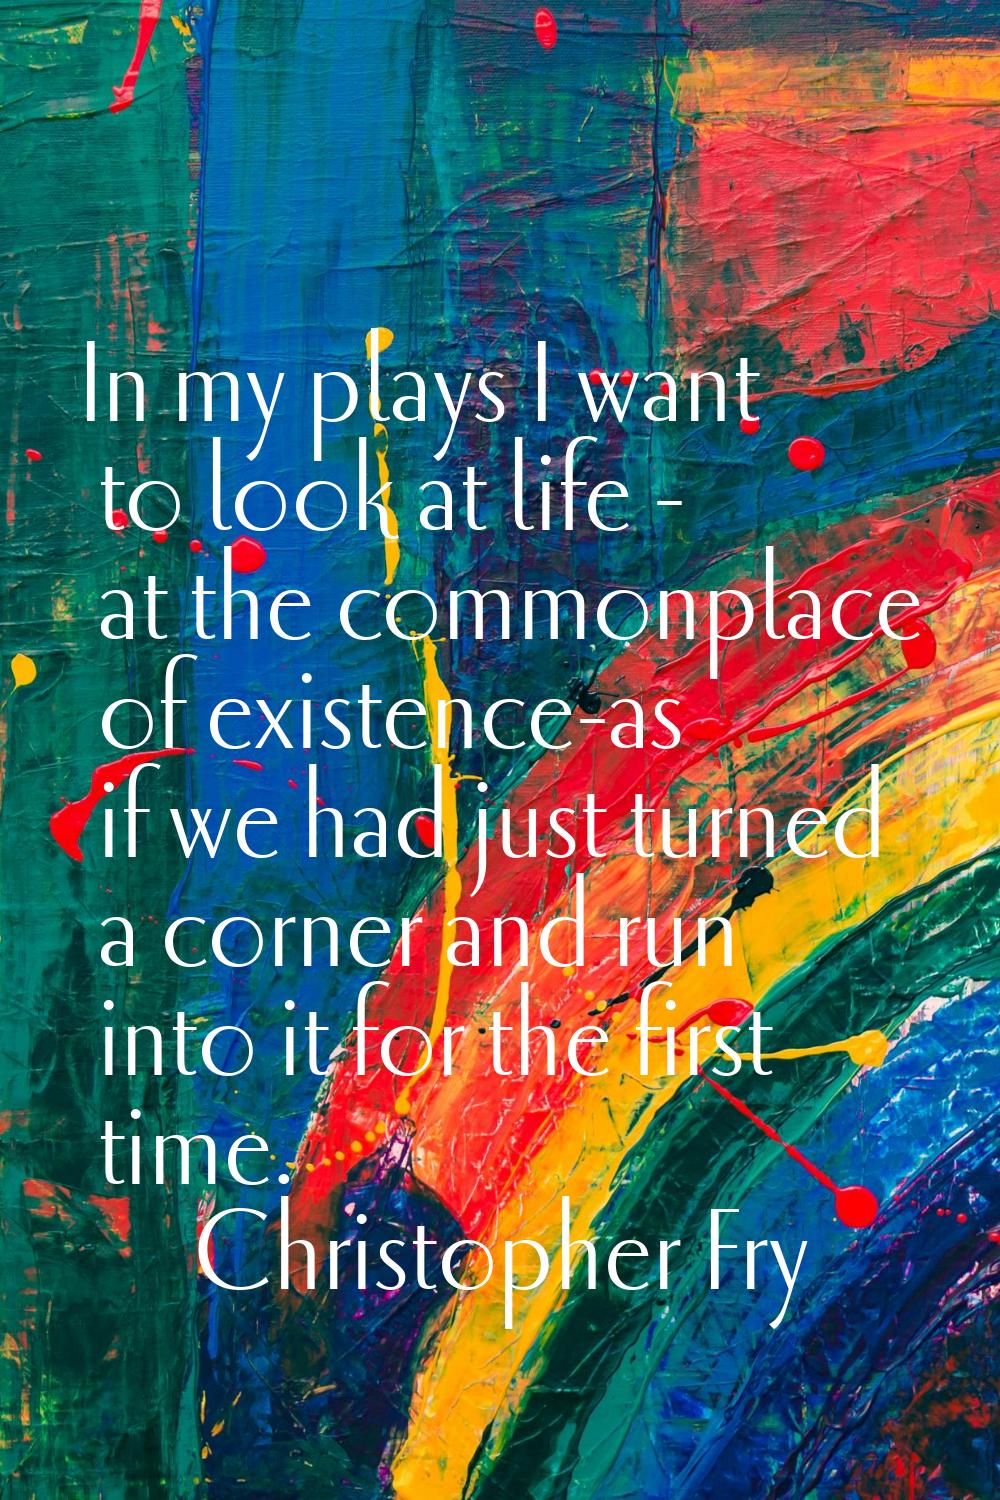 In my plays I want to look at life - at the commonplace of existence-as if we had just turned a cor